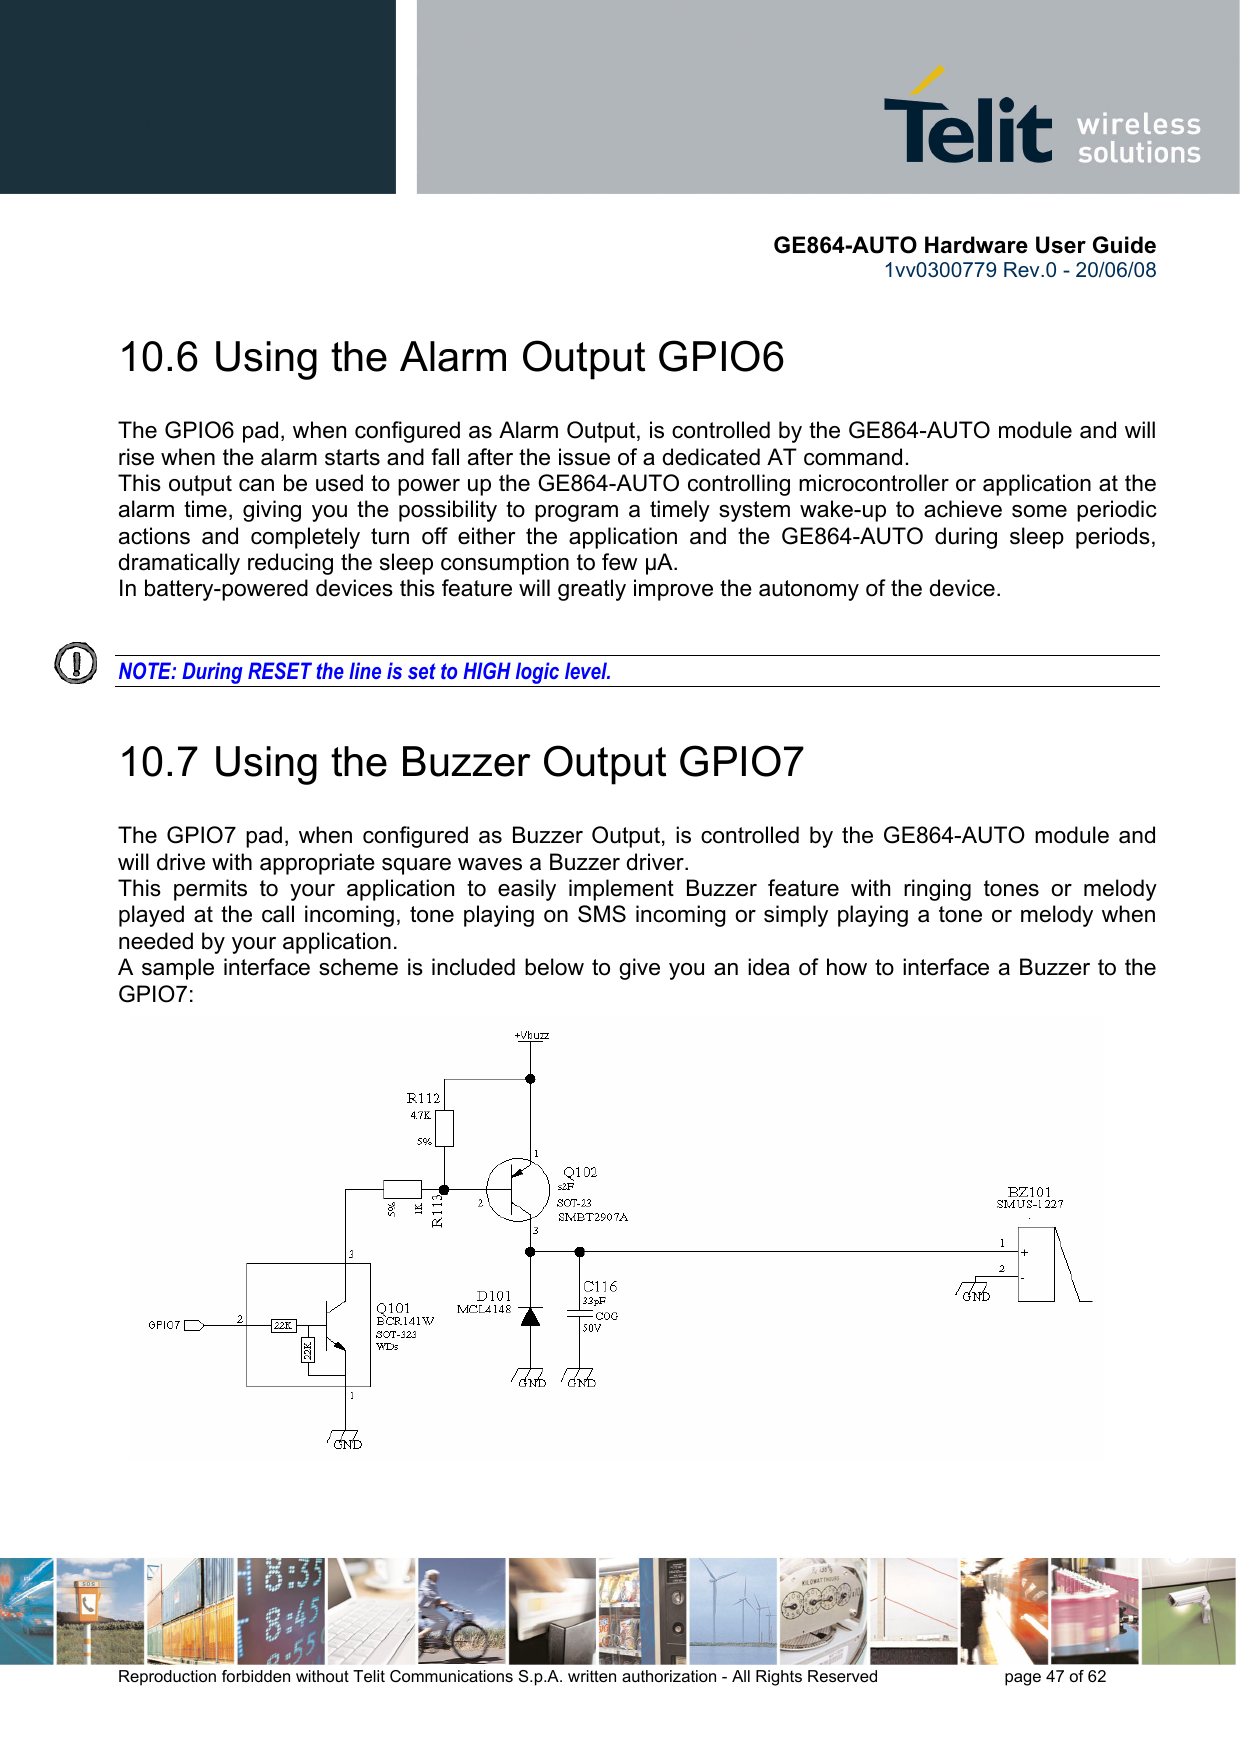       GE864-AUTO Hardware User Guide 1vv0300779 Rev.0 - 20/06/08      Reproduction forbidden without Telit Communications S.p.A. written authorization - All Rights Reserved    page 47 of 62  10.6  Using the Alarm Output GPIO6 The GPIO6 pad, when configured as Alarm Output, is controlled by the GE864-AUTO module and will rise when the alarm starts and fall after the issue of a dedicated AT command. This output can be used to power up the GE864-AUTO controlling microcontroller or application at the alarm time, giving you the possibility to program a timely system wake-up to achieve some periodic actions and completely turn off either the application and the GE864-AUTO during sleep periods, dramatically reducing the sleep consumption to few μA. In battery-powered devices this feature will greatly improve the autonomy of the device.   NOTE: During RESET the line is set to HIGH logic level. 10.7  Using the Buzzer Output GPIO7 The GPIO7 pad, when configured as Buzzer Output, is controlled by the GE864-AUTO module and will drive with appropriate square waves a Buzzer driver. This permits to your application to easily implement Buzzer feature with ringing tones or melody played at the call incoming, tone playing on SMS incoming or simply playing a tone or melody when needed by your application. A sample interface scheme is included below to give you an idea of how to interface a Buzzer to the GPIO7:  